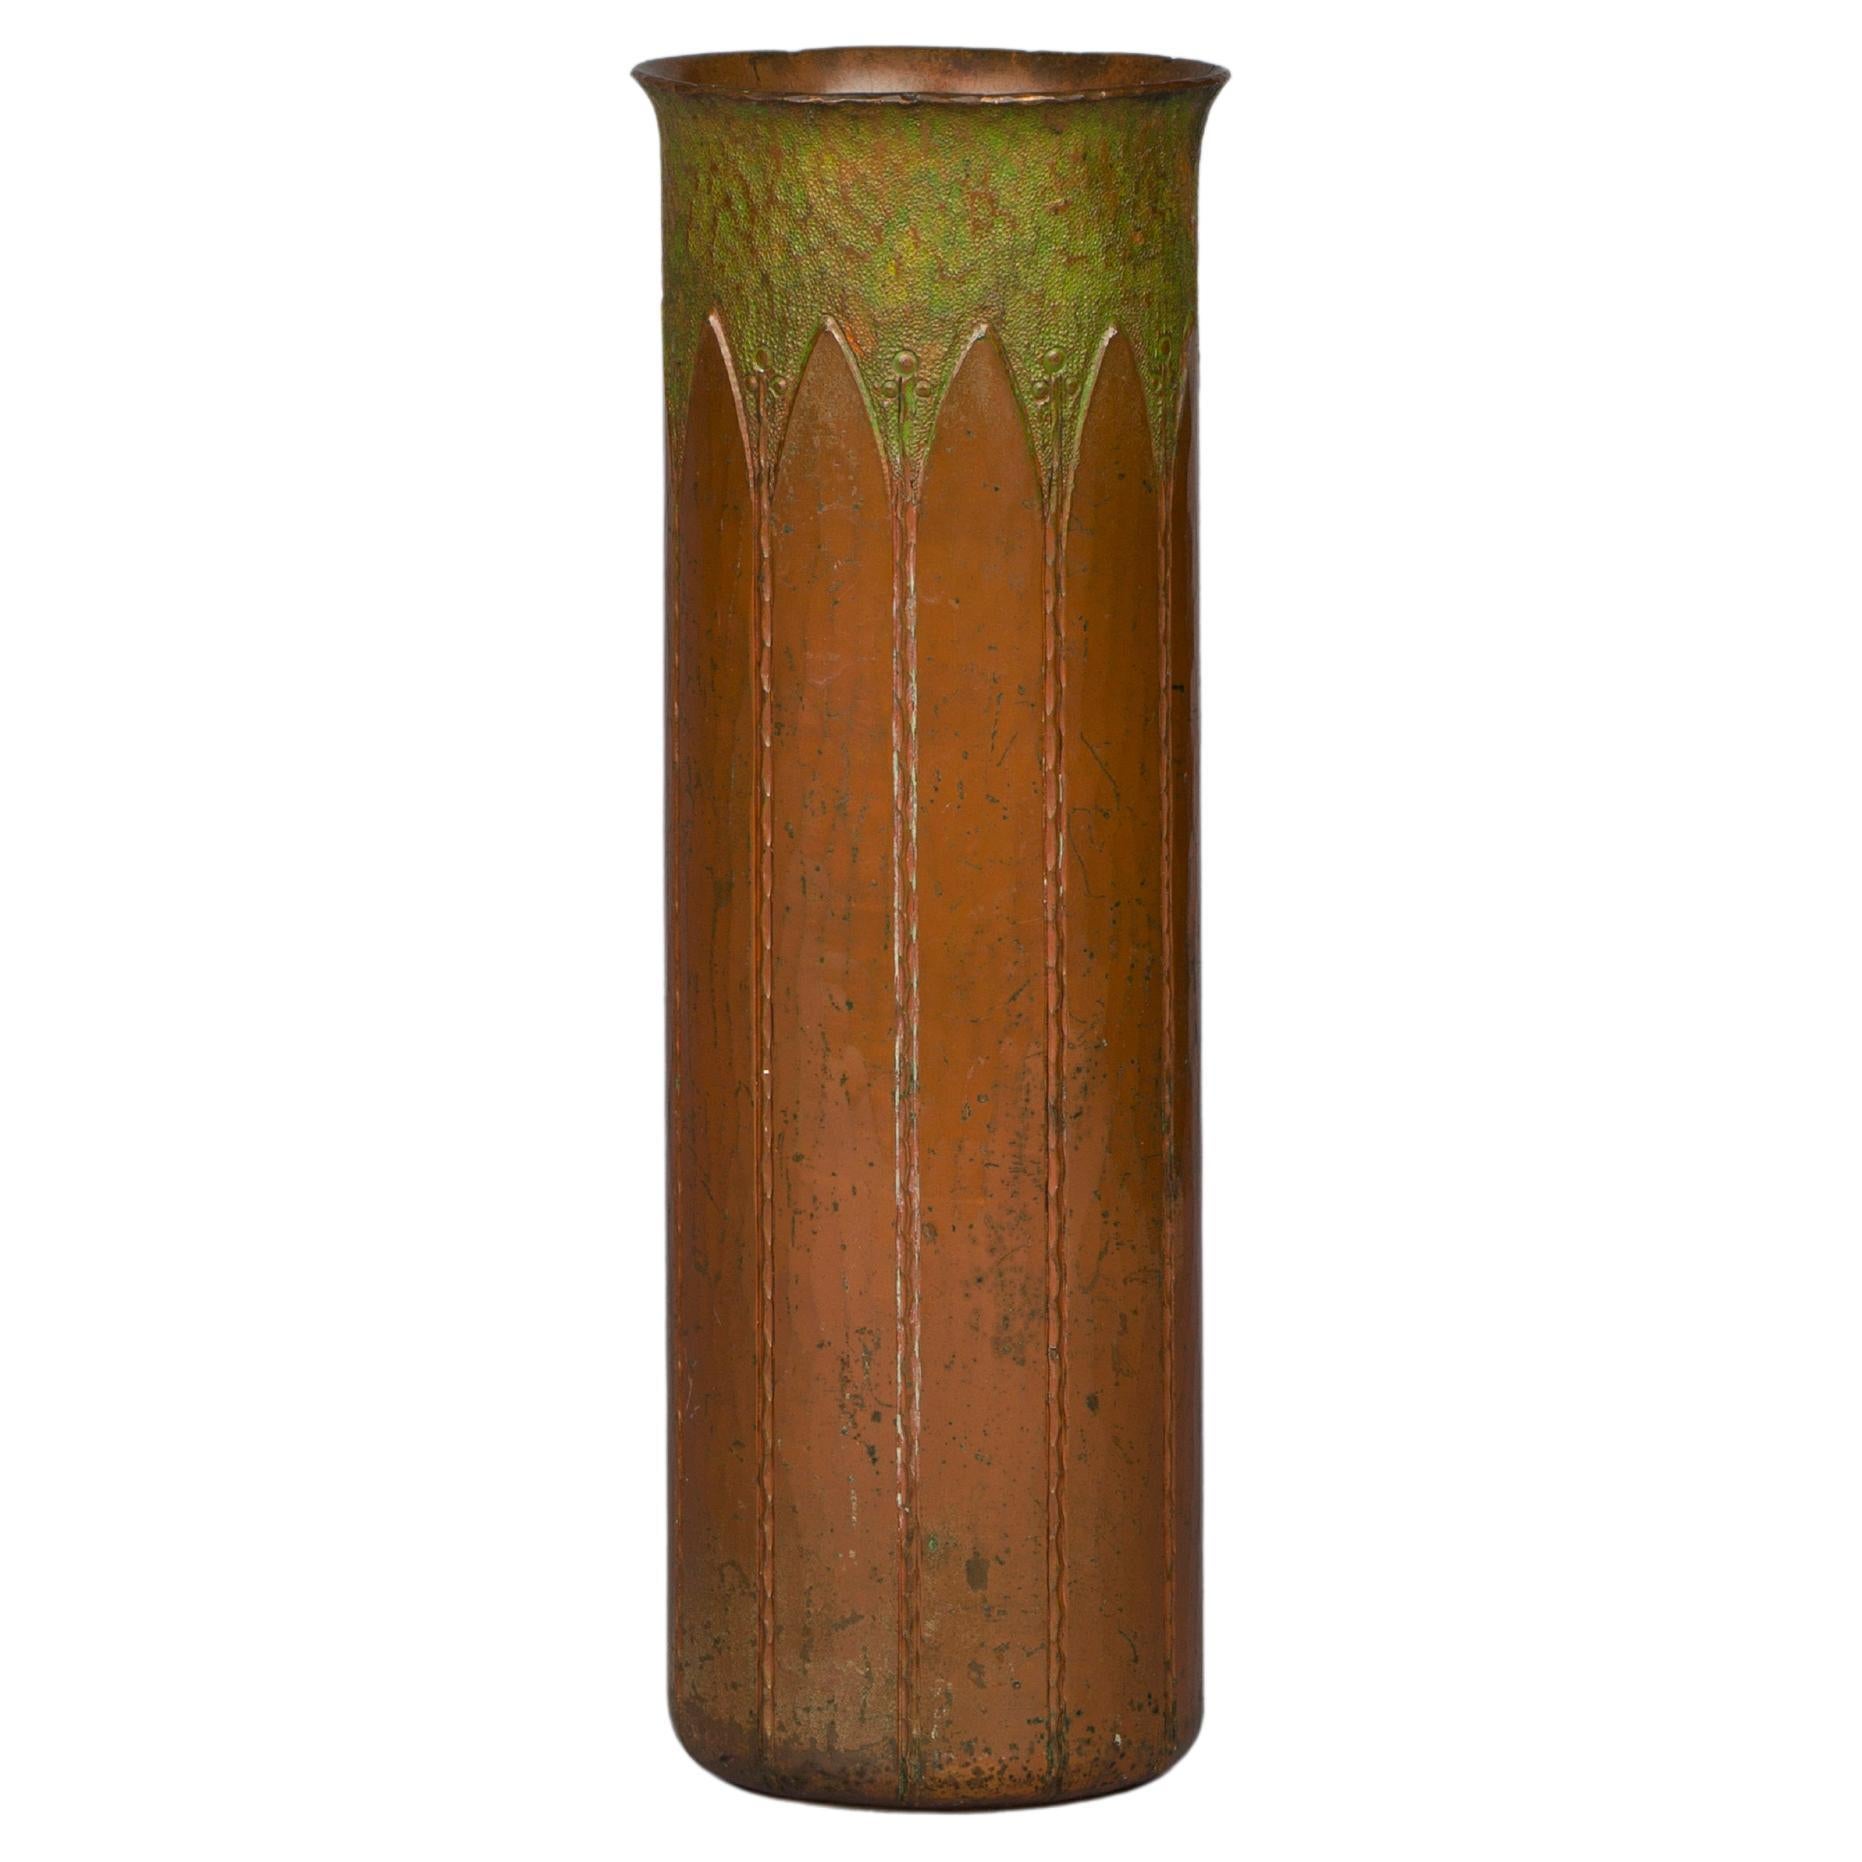 Rare Hammered Copper Cylindrical Vase, Roycroft, circa 1910 For Sale